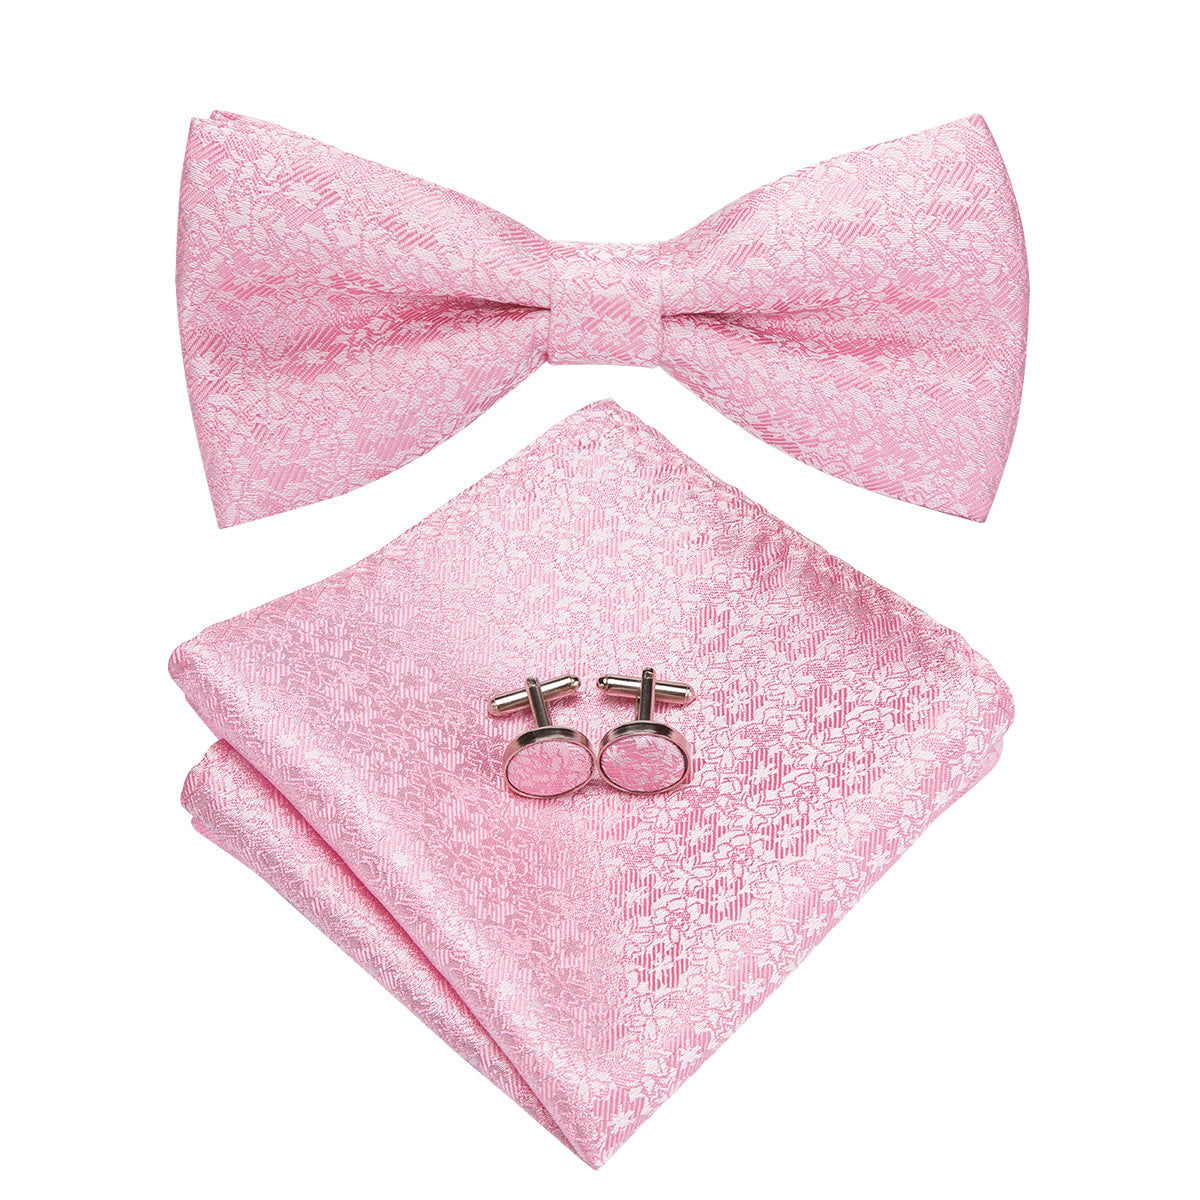 White Pink Floral Pre-tied Bow Tie Hanky Cufflinks Set